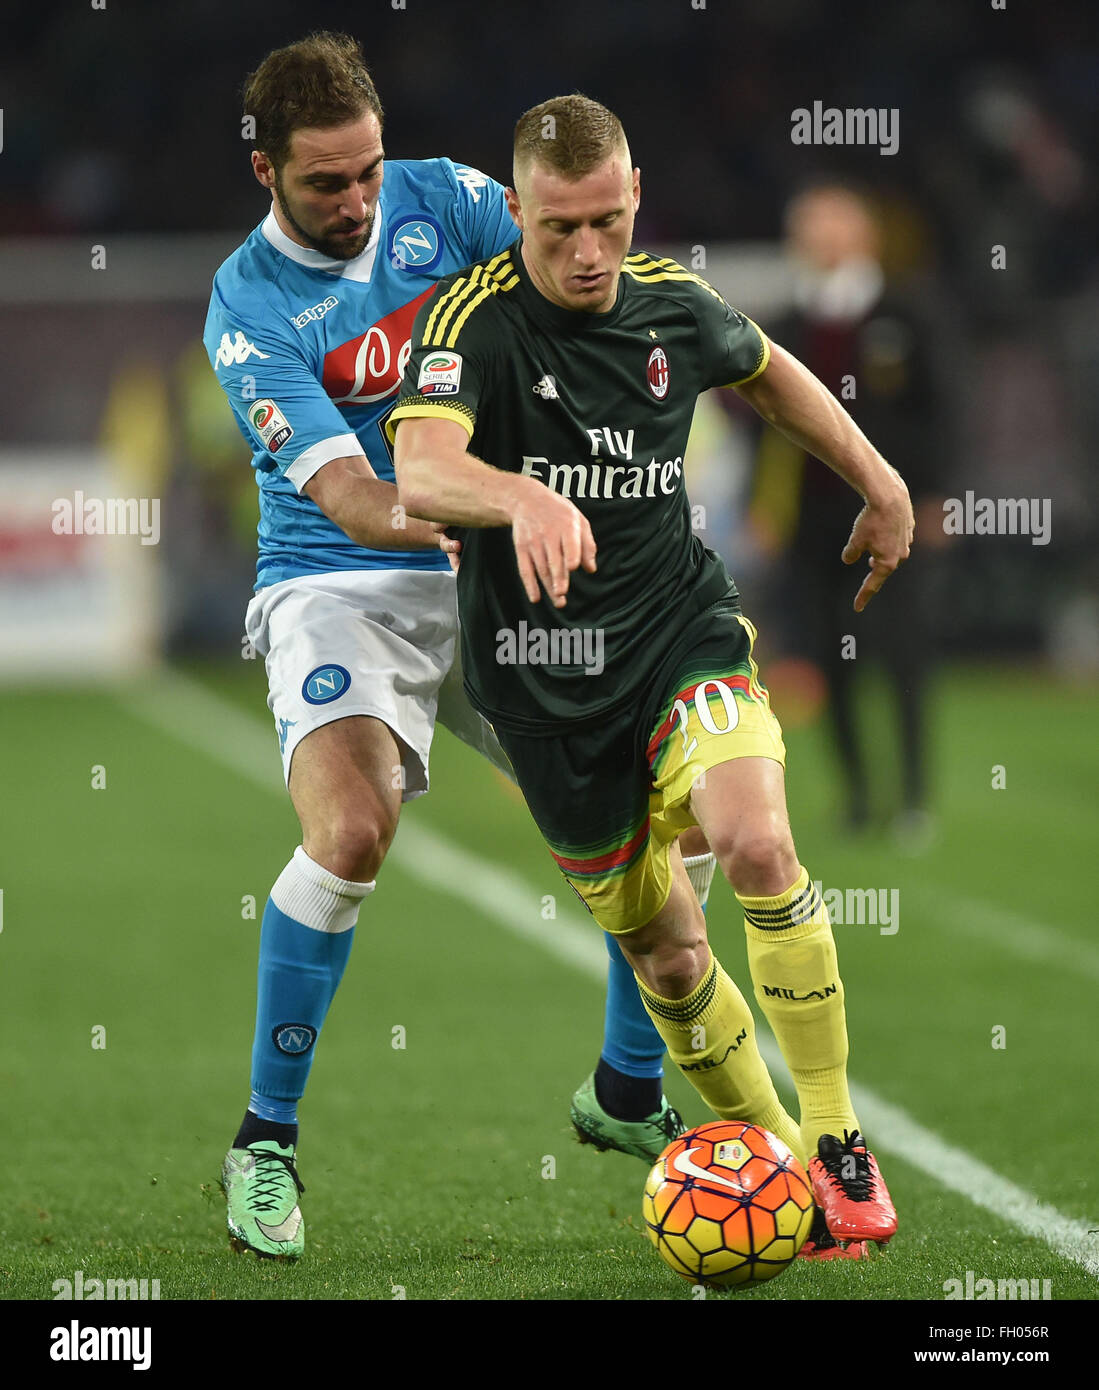 Naples, Italy. 22nd Feb, 2016. AC Milan's Ignazio Abate (R) vies with Napoli's Gonzalo Higuain during the Italian Serie A soccer match between SSC Napoli and AC Milan in Naples, Italy, Feb. 22, 2016. The match ended with a 1-1 draw. Credit:  Alberto Lingria/Xinhua/Alamy Live News Stock Photo